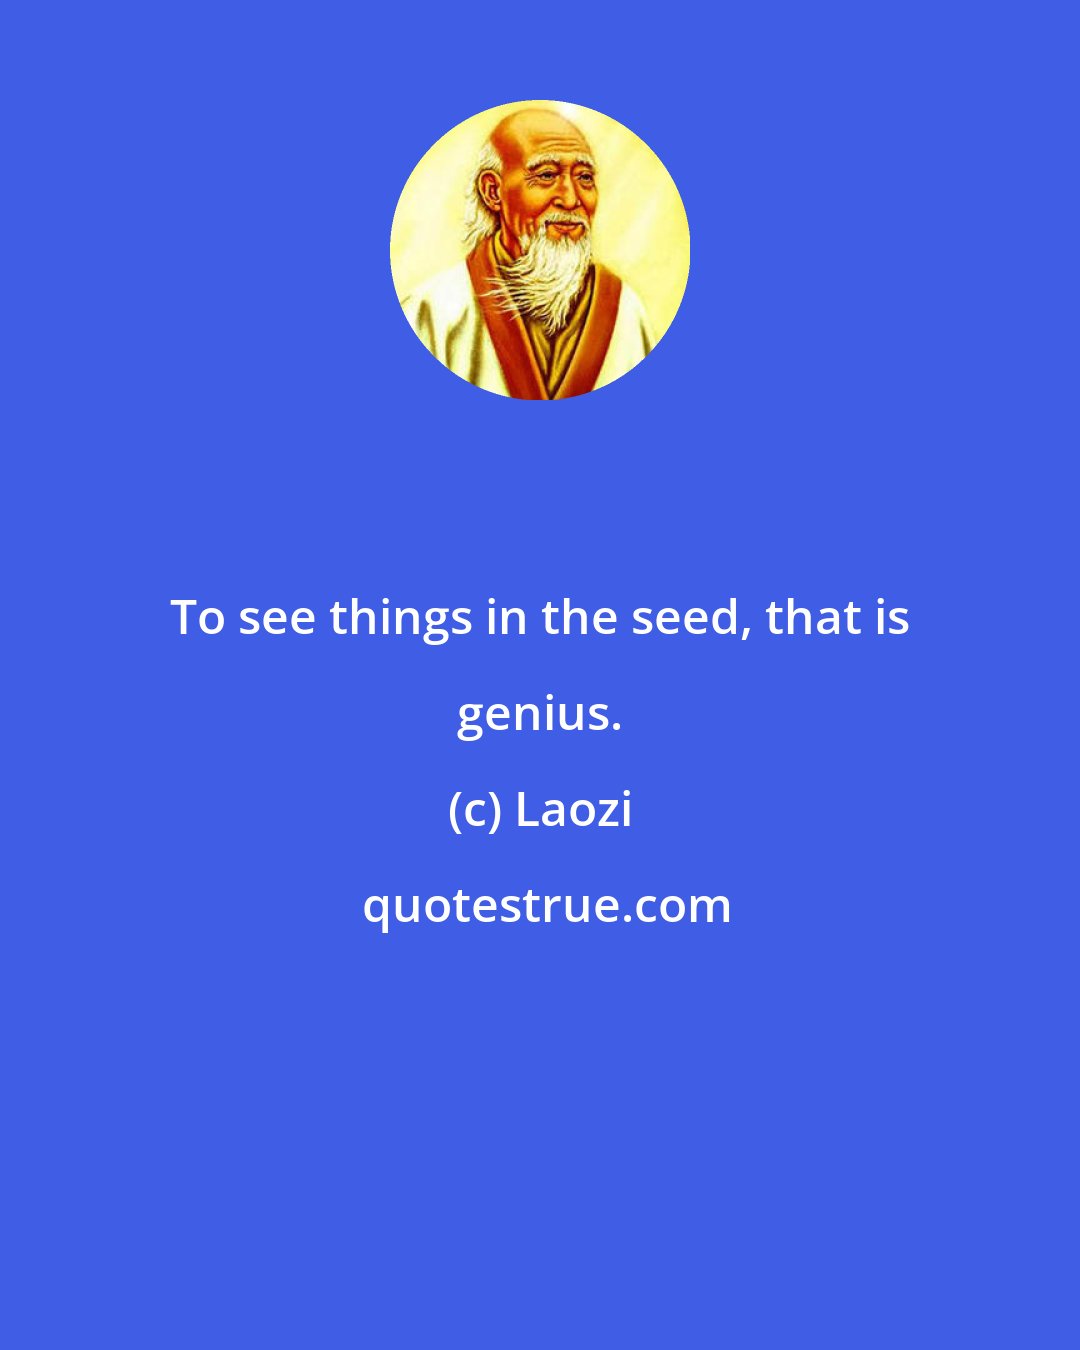 Laozi: To see things in the seed, that is genius.